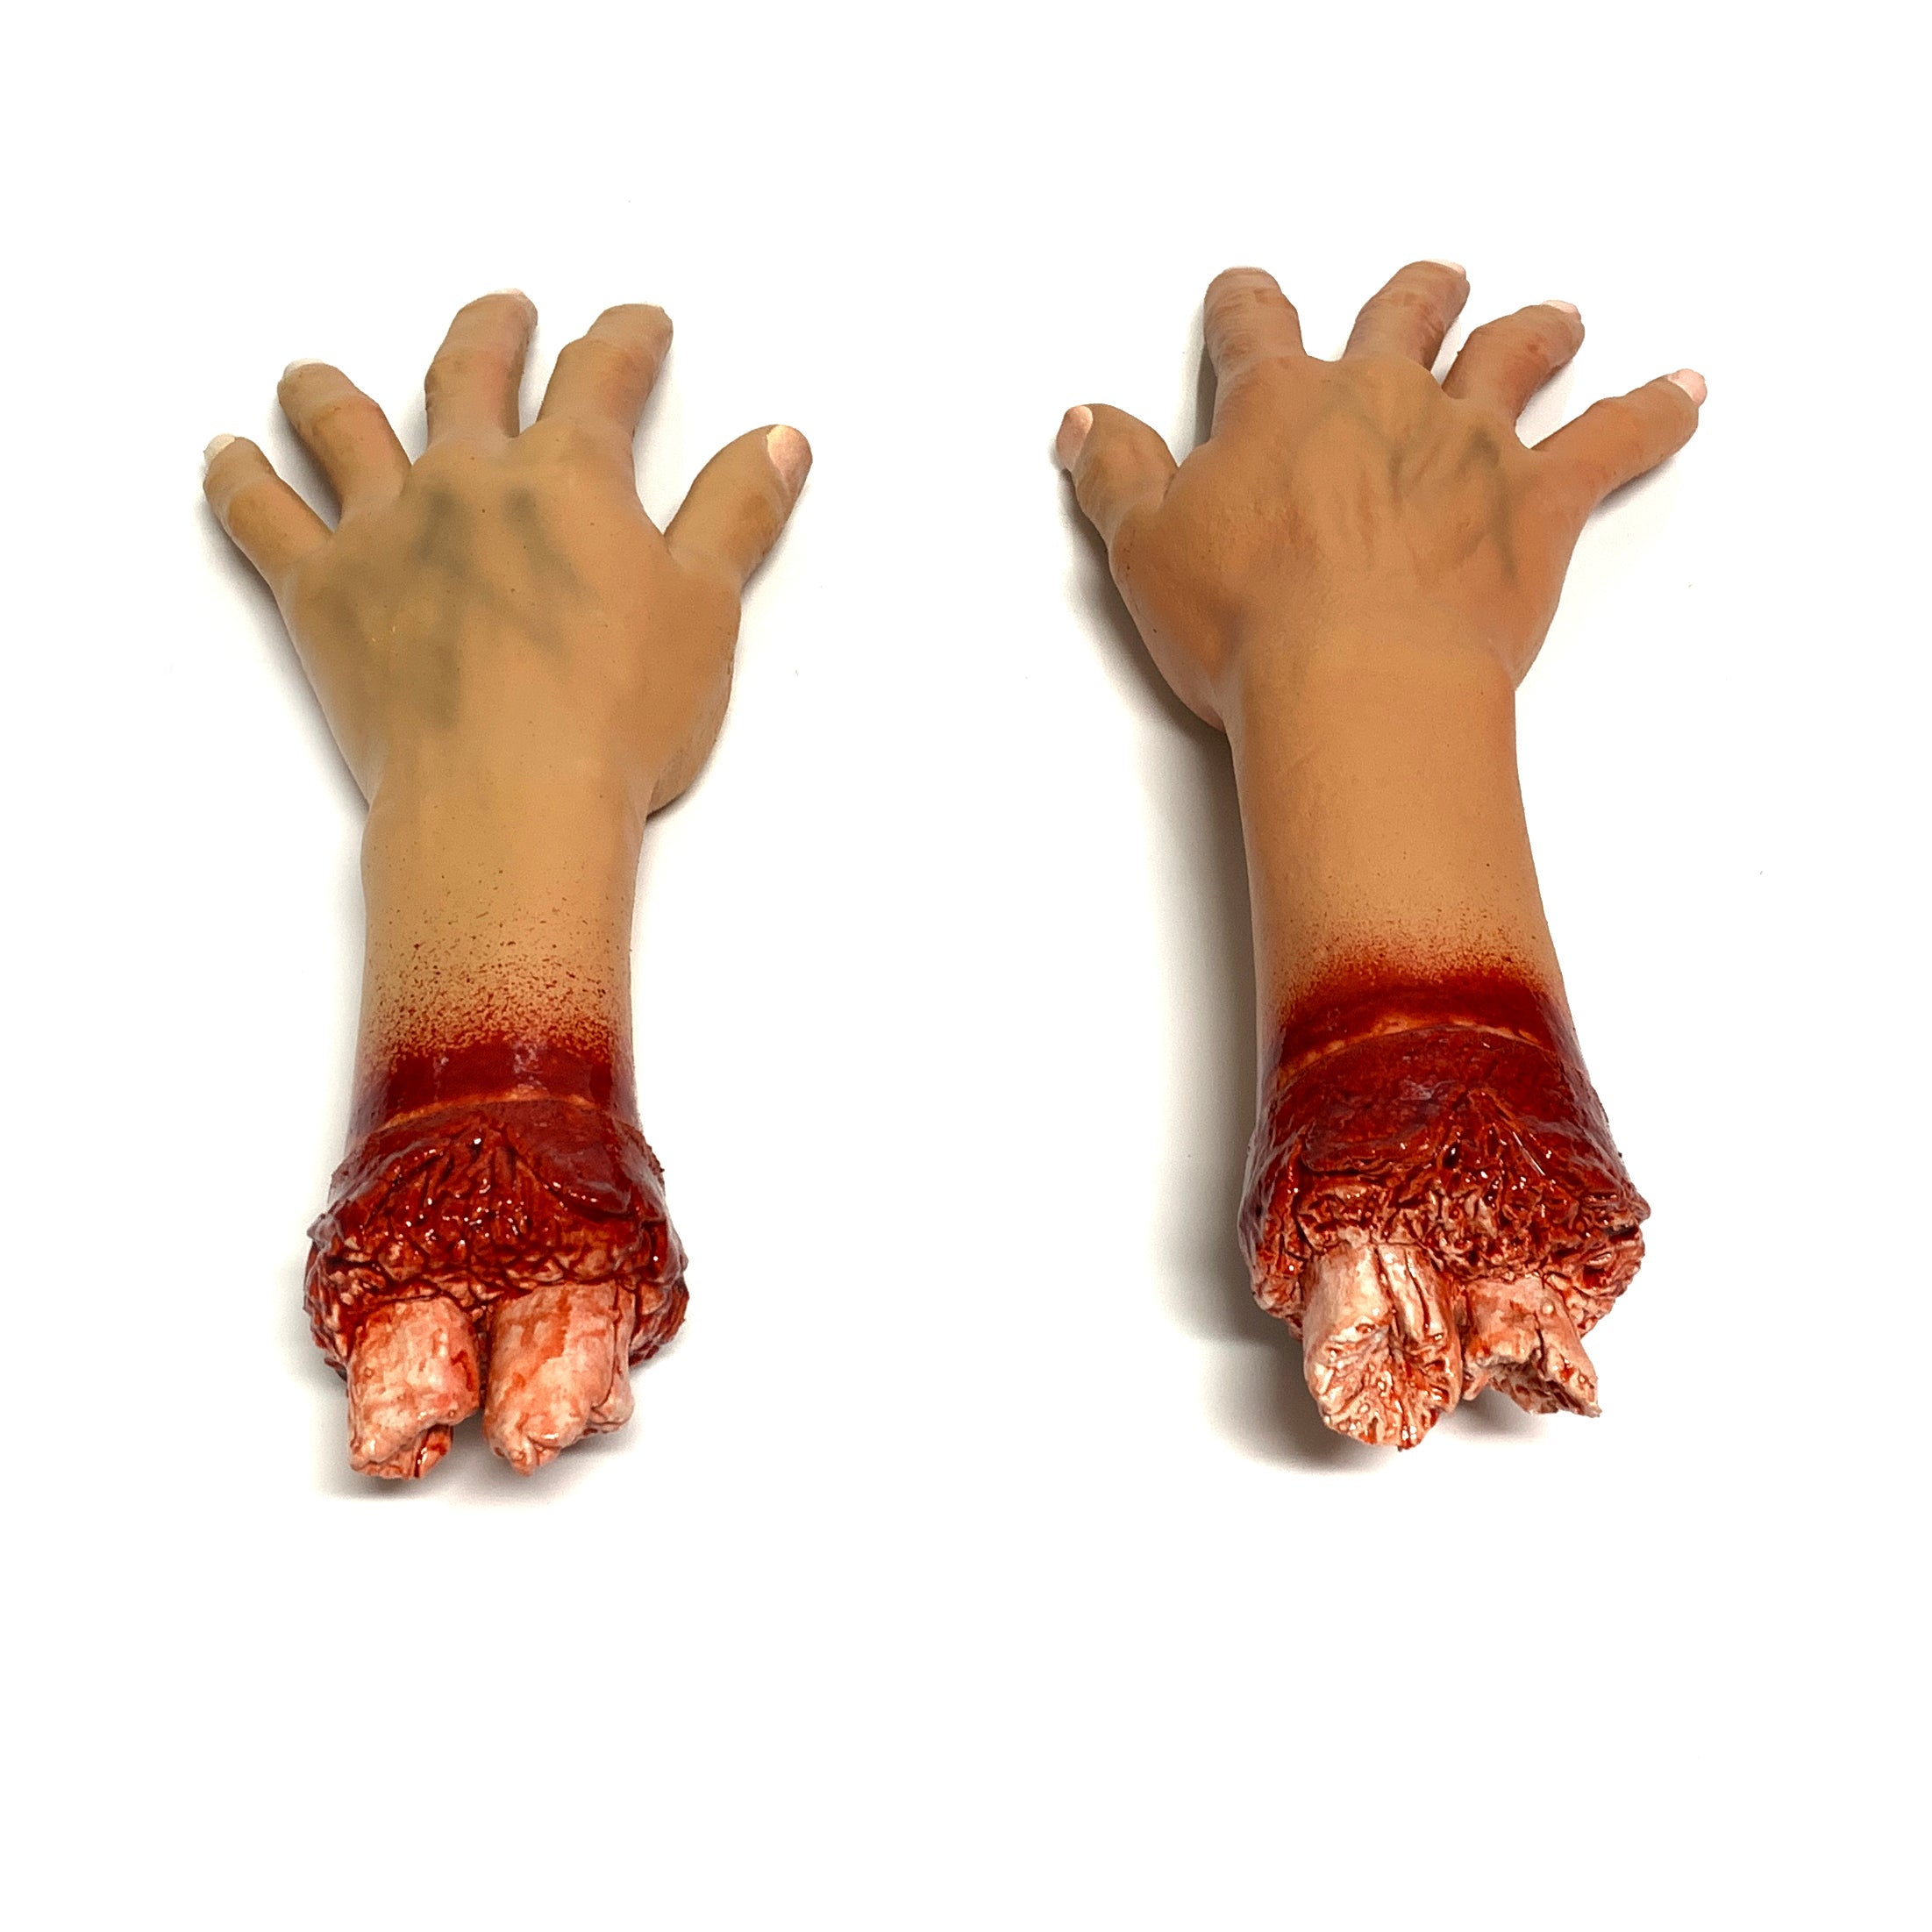 Foam Rubber and Latex Bloody Severed Hand Stump - PAIR 1 Right & 1 Left - Both Hands